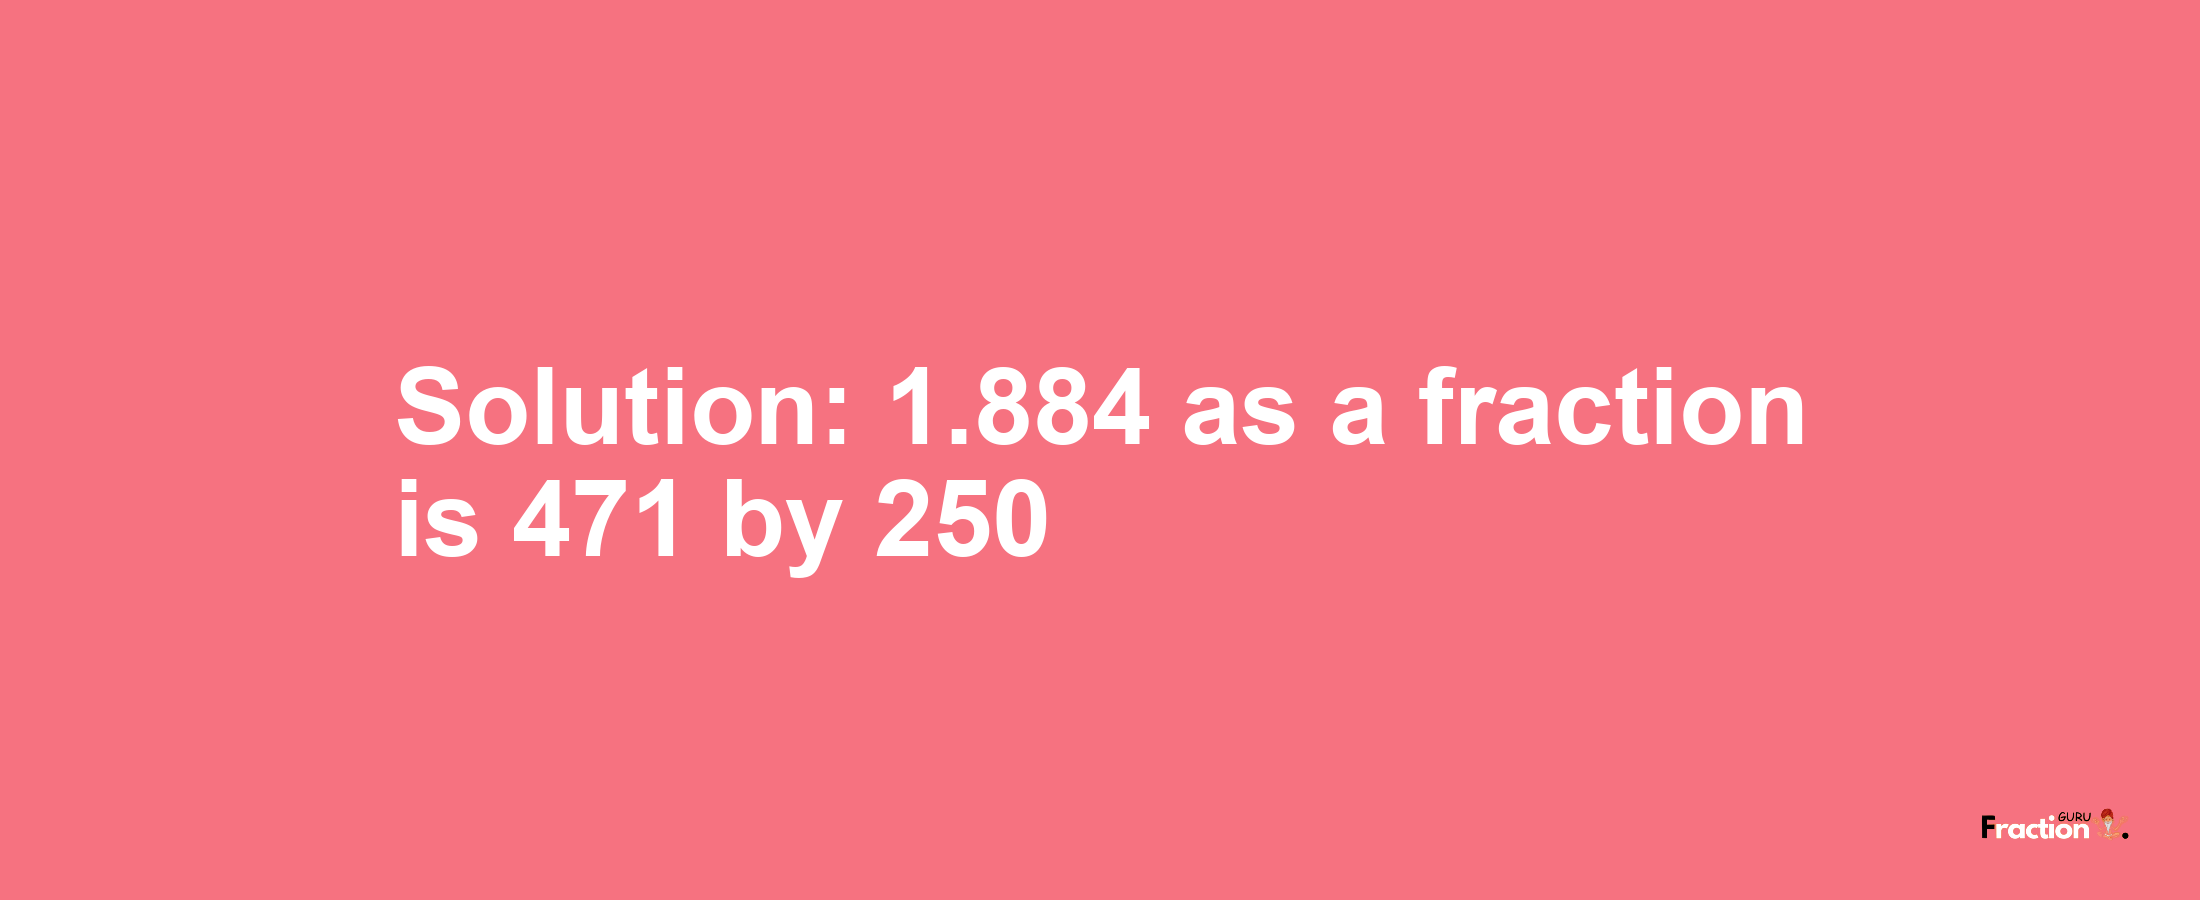 Solution:1.884 as a fraction is 471/250